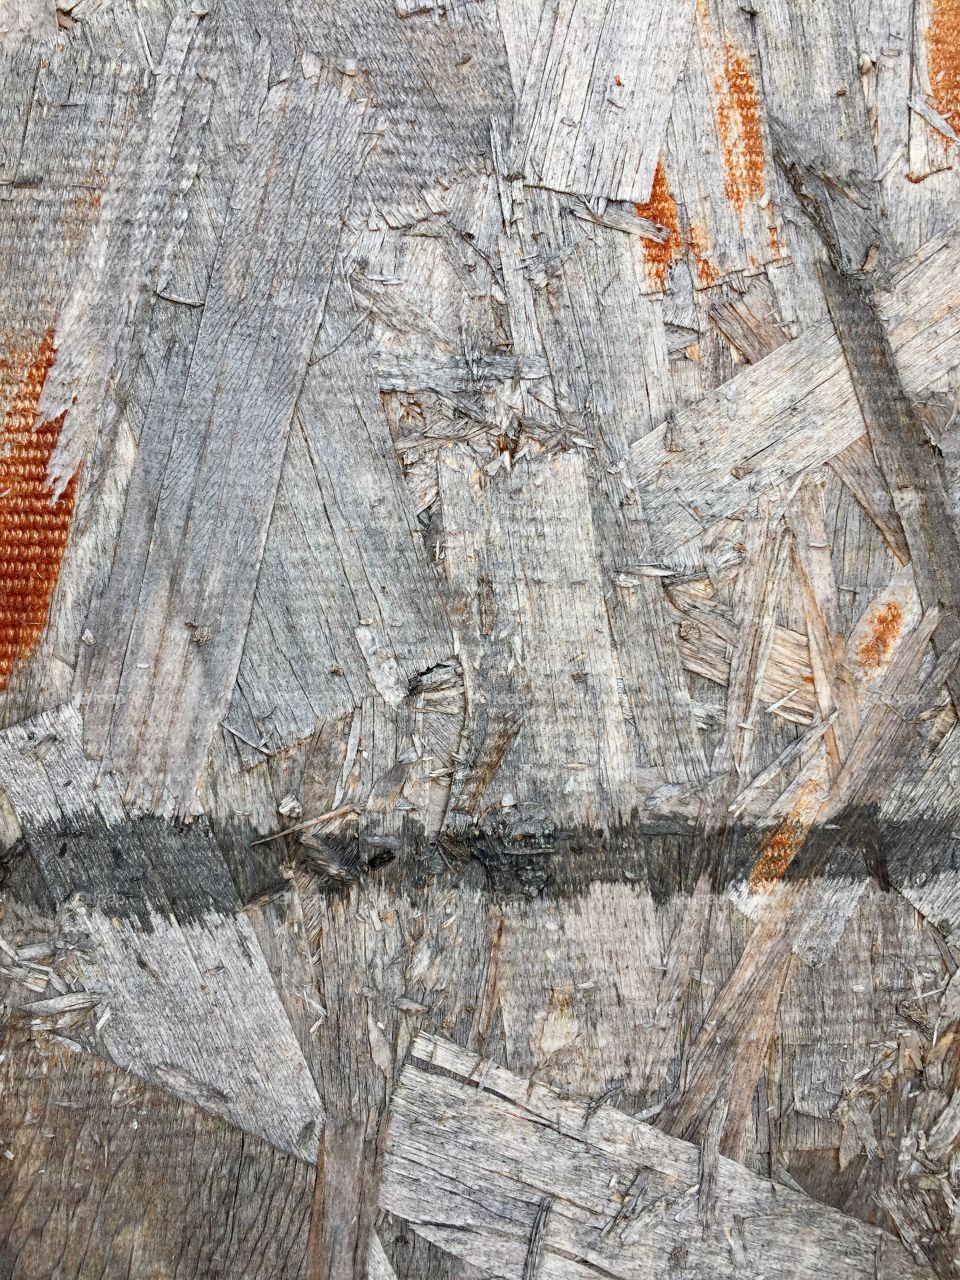 Abstract closeup surface detail of weathered particle board sheeting 